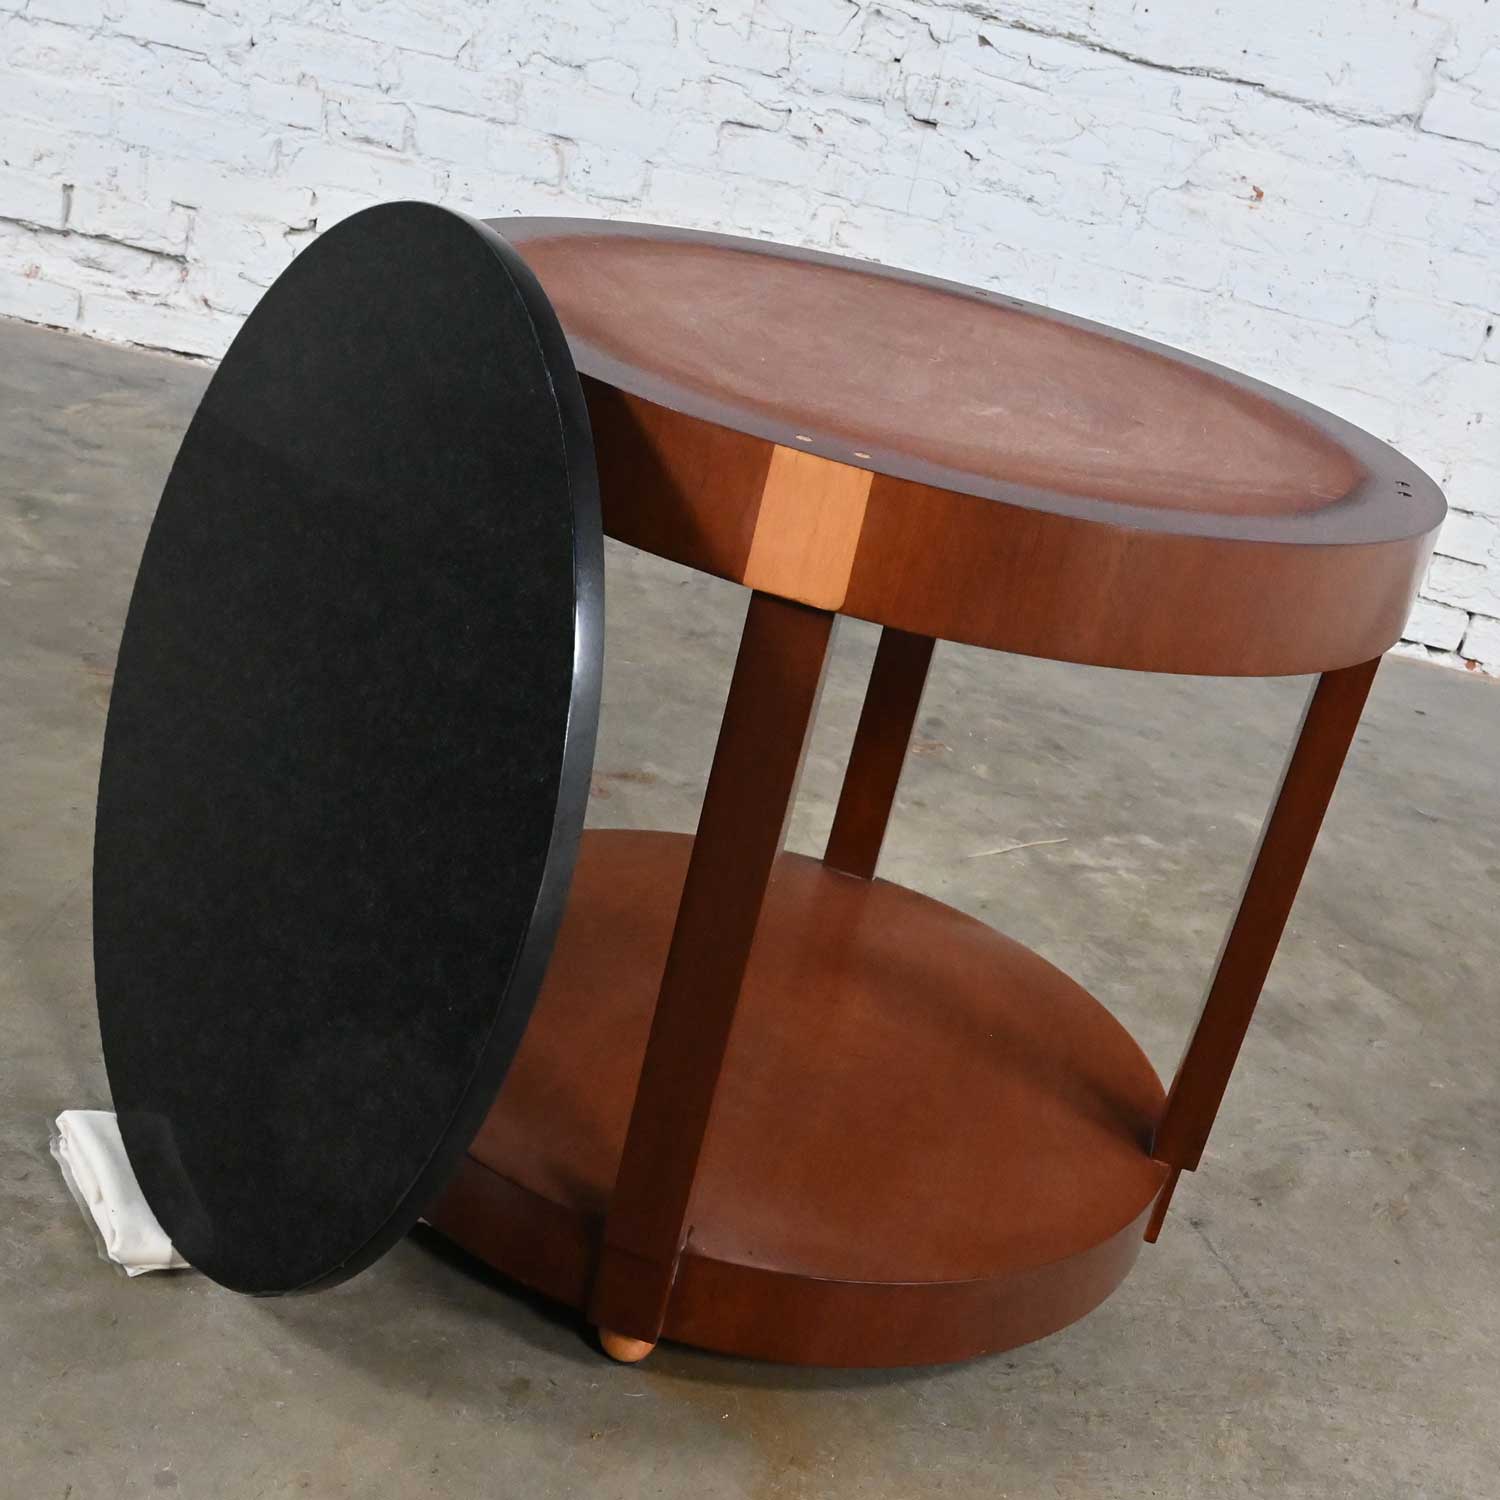 Late 20th Century Art Deco Revival Custom Designed Two Toned Mahogany Round Side Table with Black Granite Top